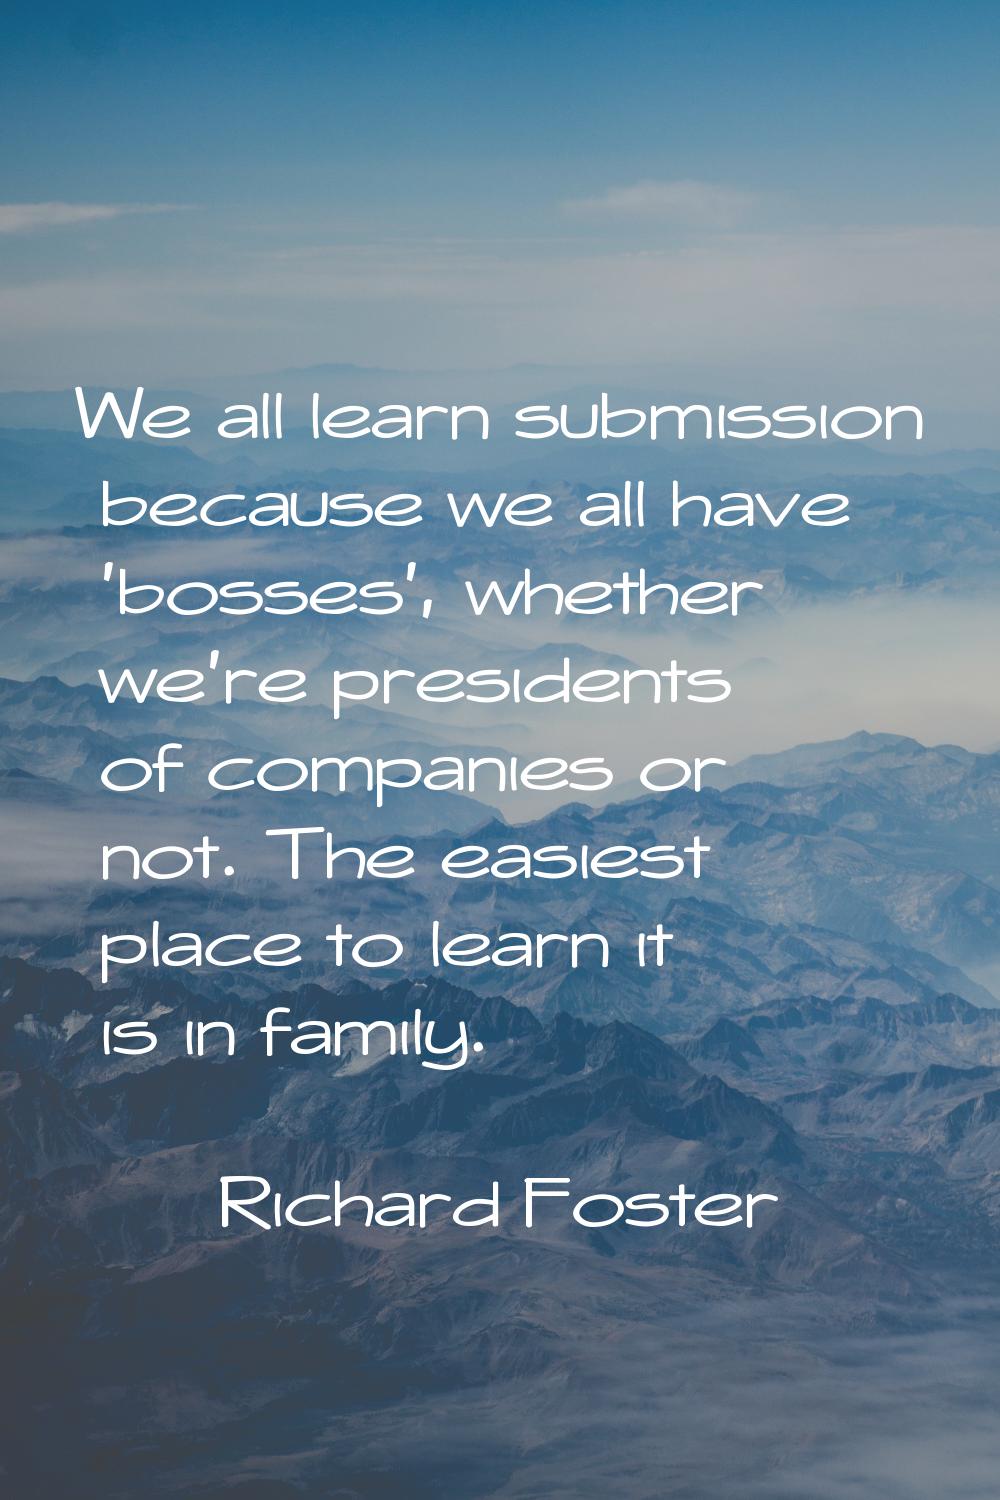 We all learn submission because we all have 'bosses', whether we're presidents of companies or not.